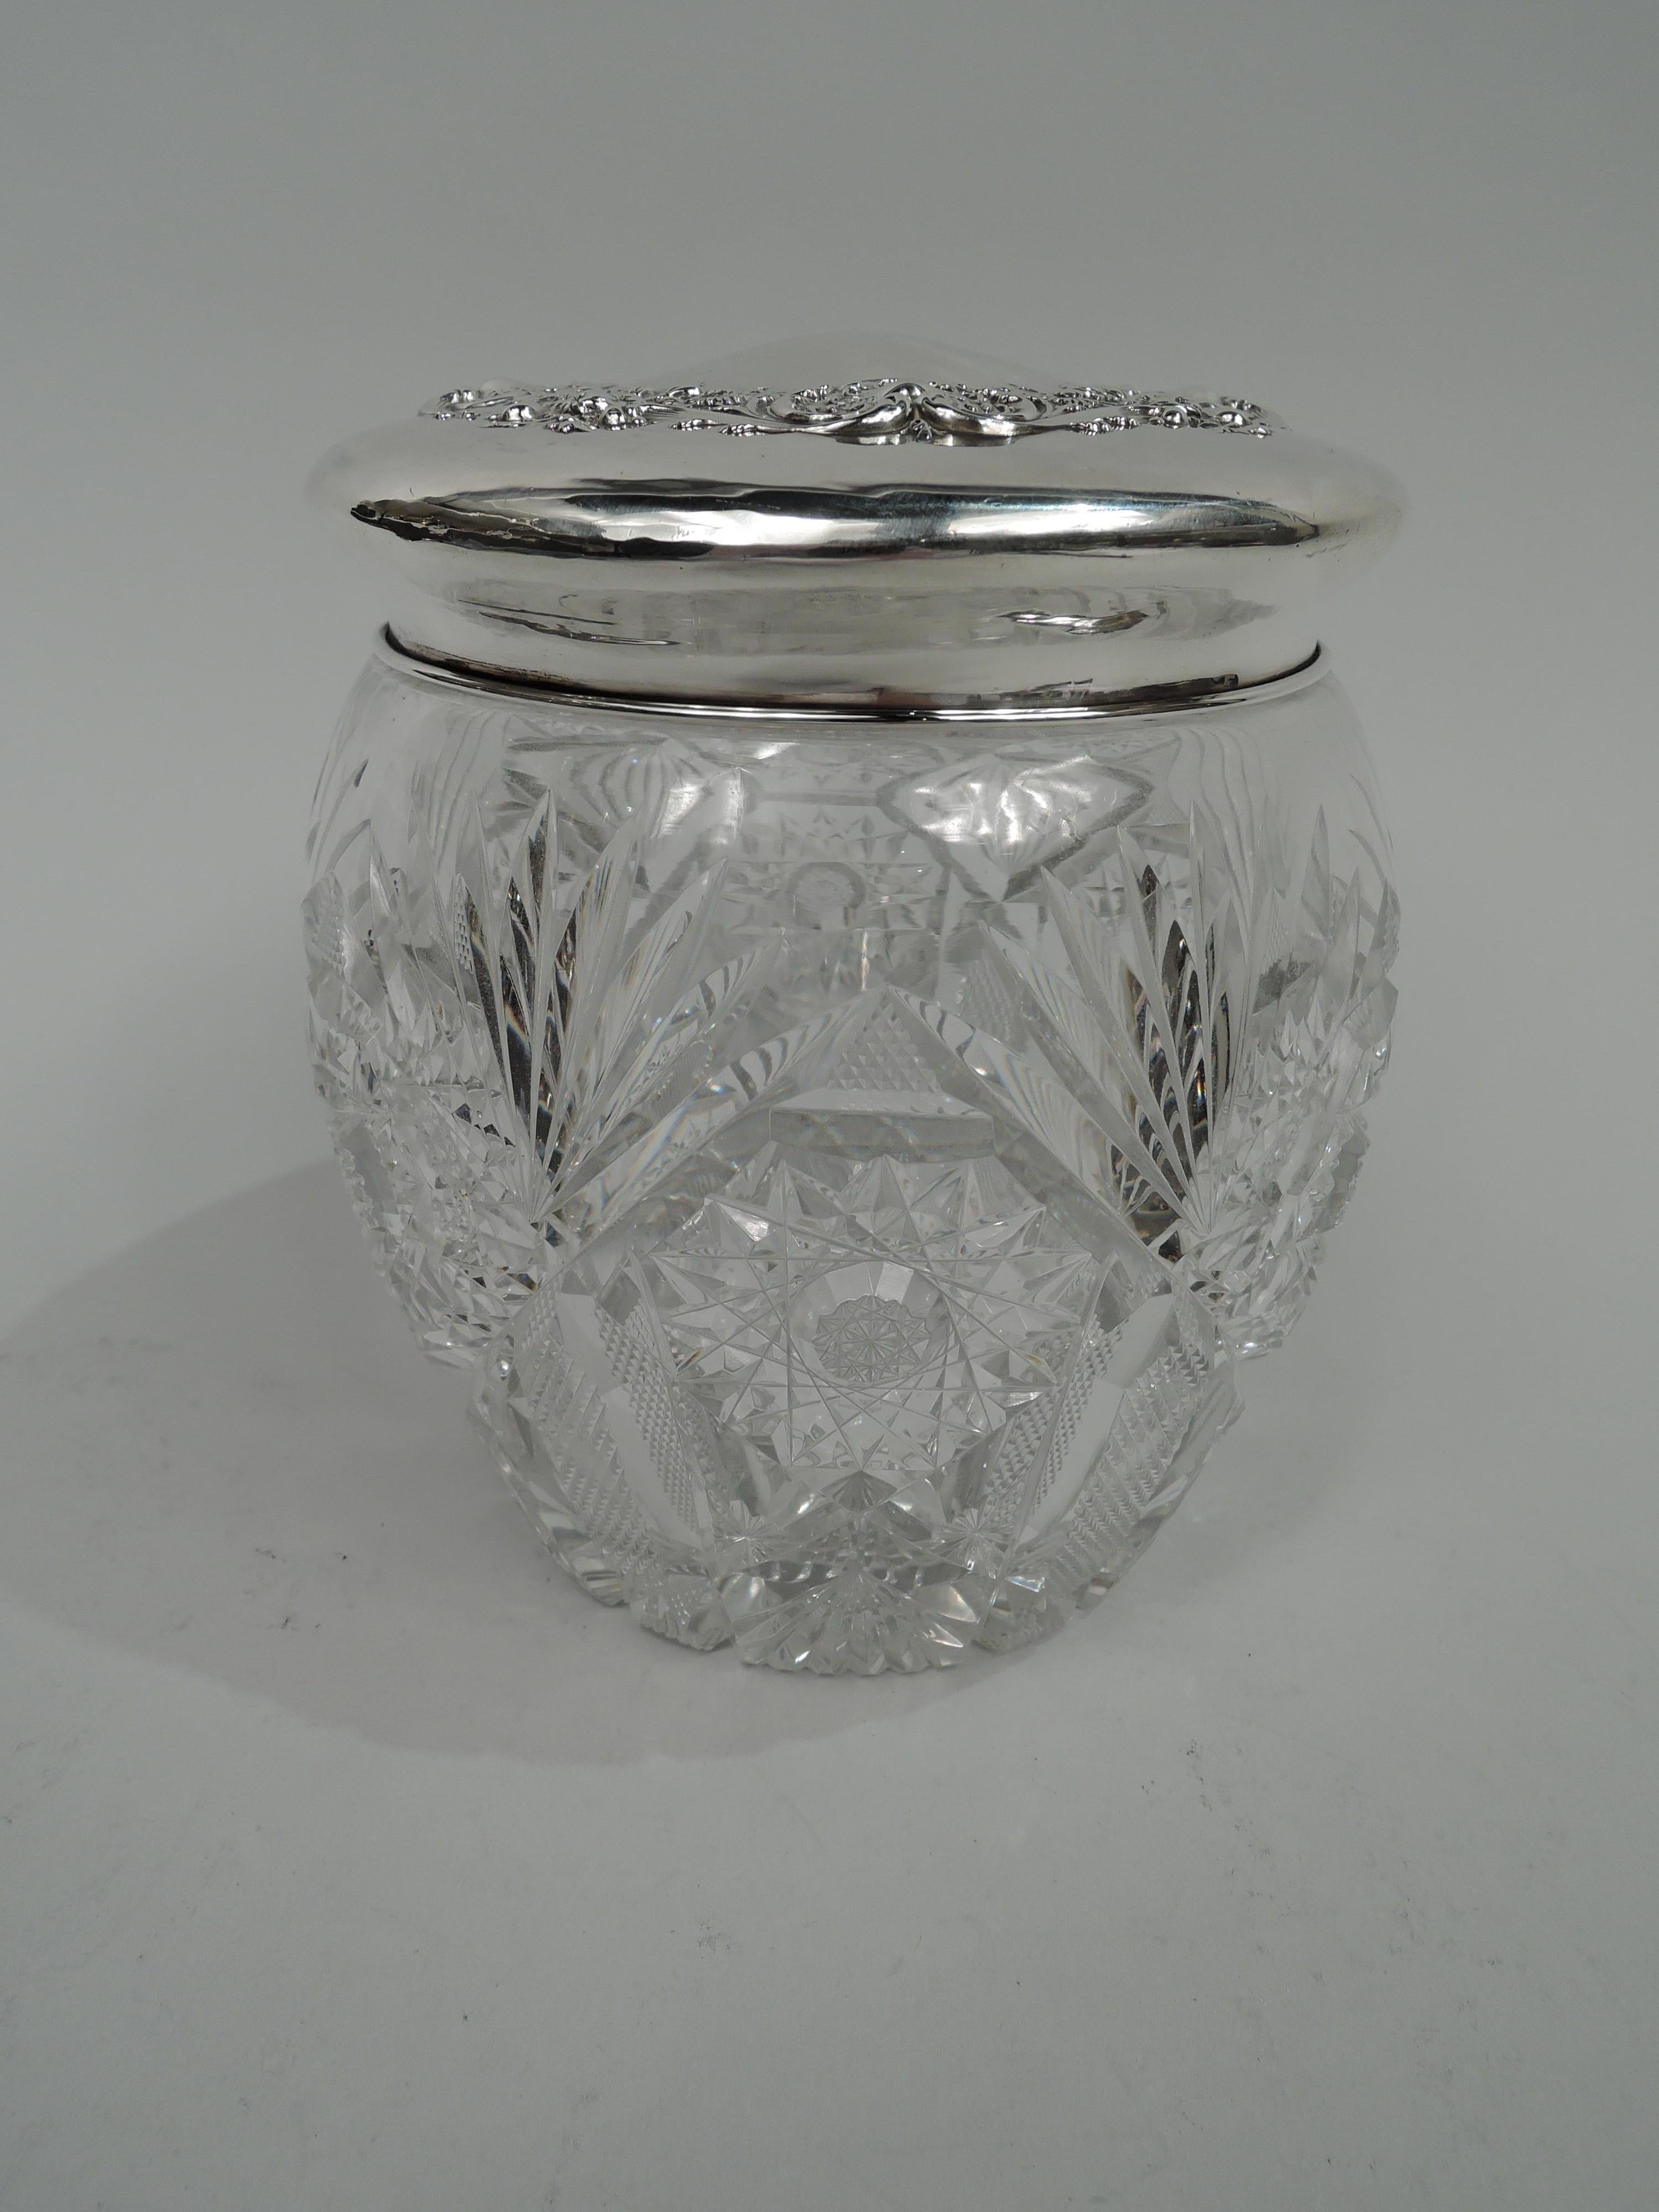 Large brilliant-cut jar with sterling silver cover. Made by Watson Co. in Attleboro, Mass., ca 1900. Round and curved with stars, ferns, and diaper. Cover gently raised; on top repousse shell, scroll, and flower wreath (vacant center). Cover